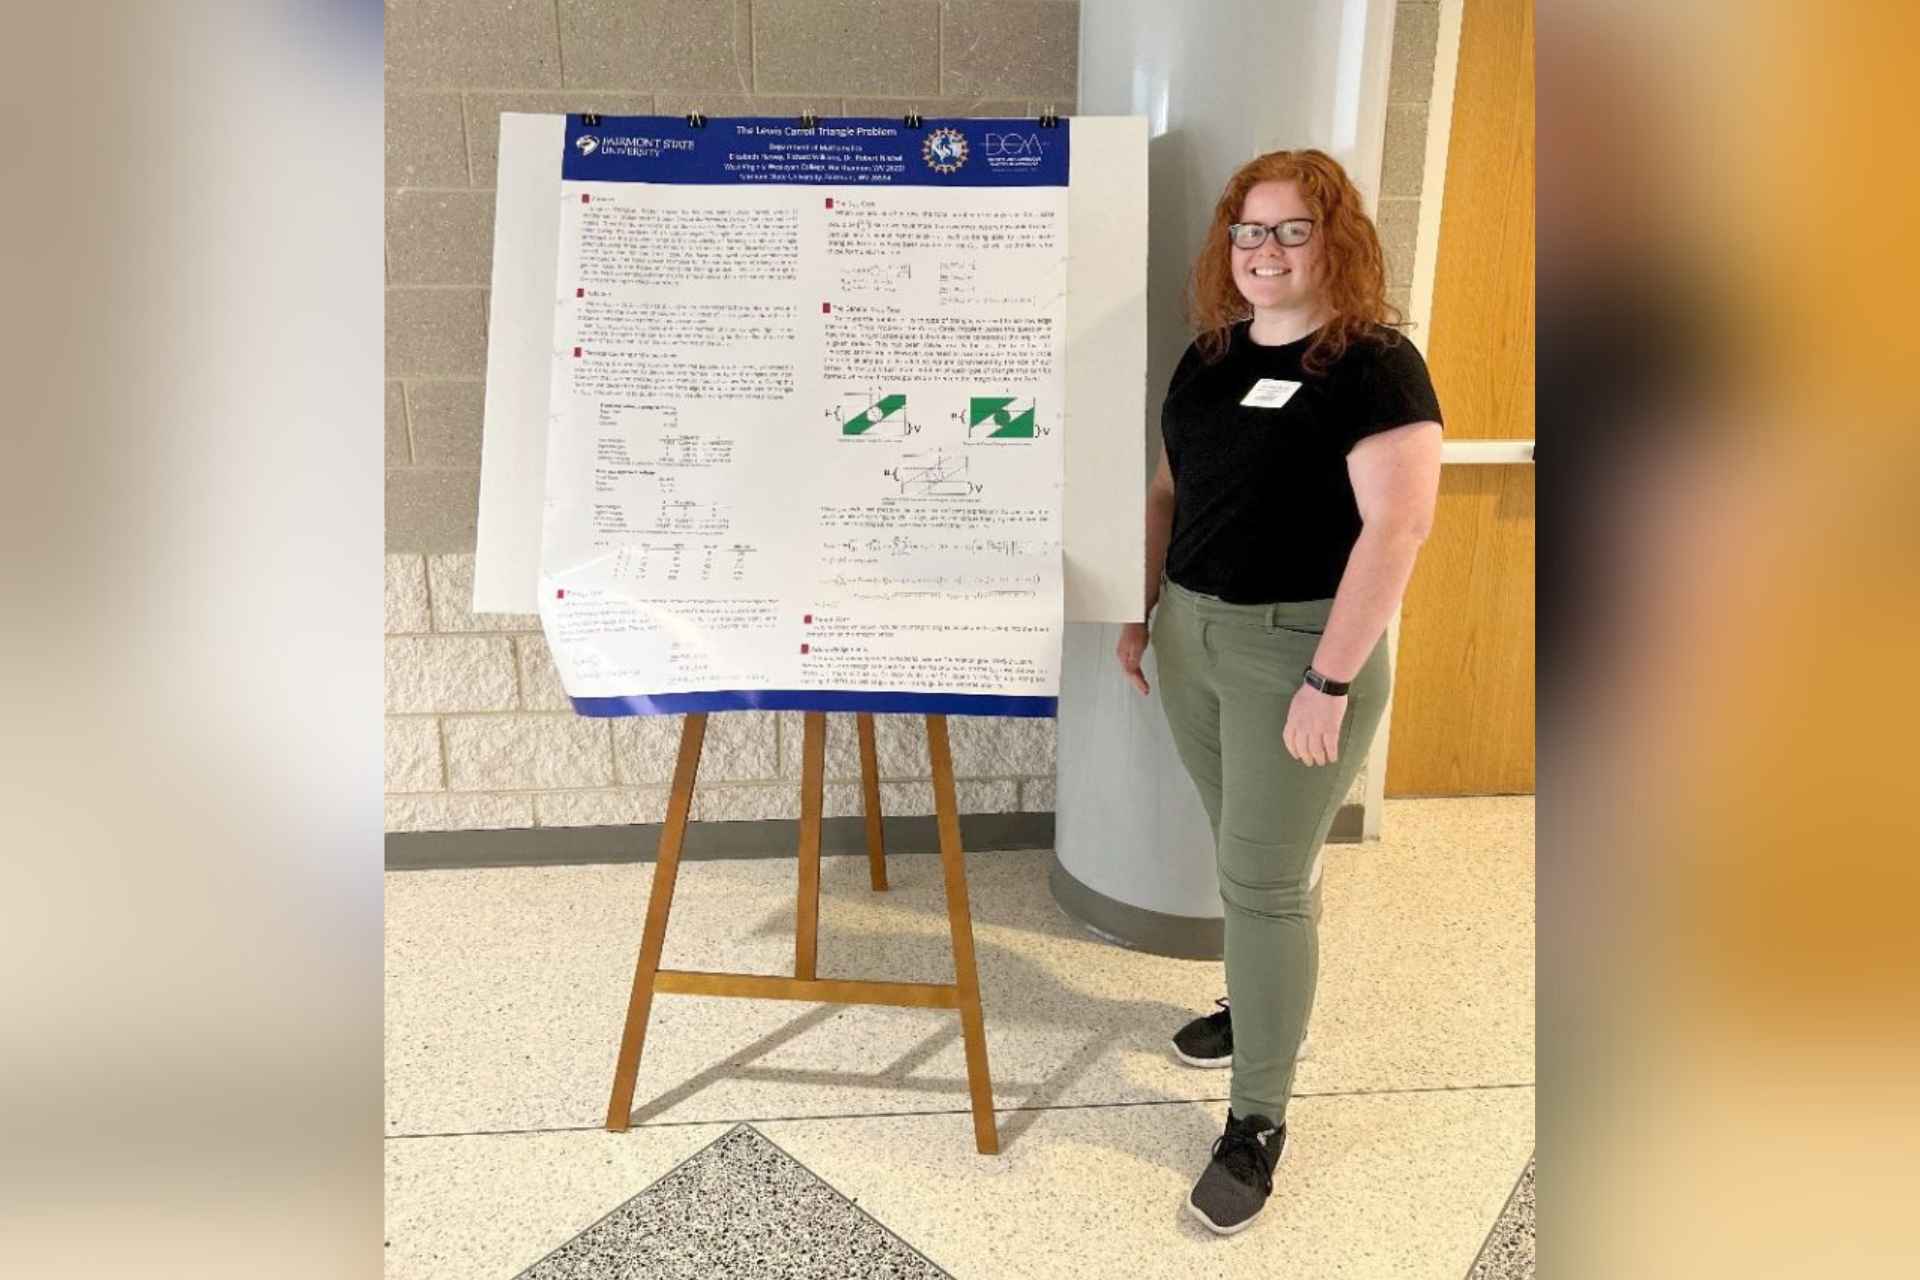 West Virginia Wesleyan College graduate places second in mathematics conference